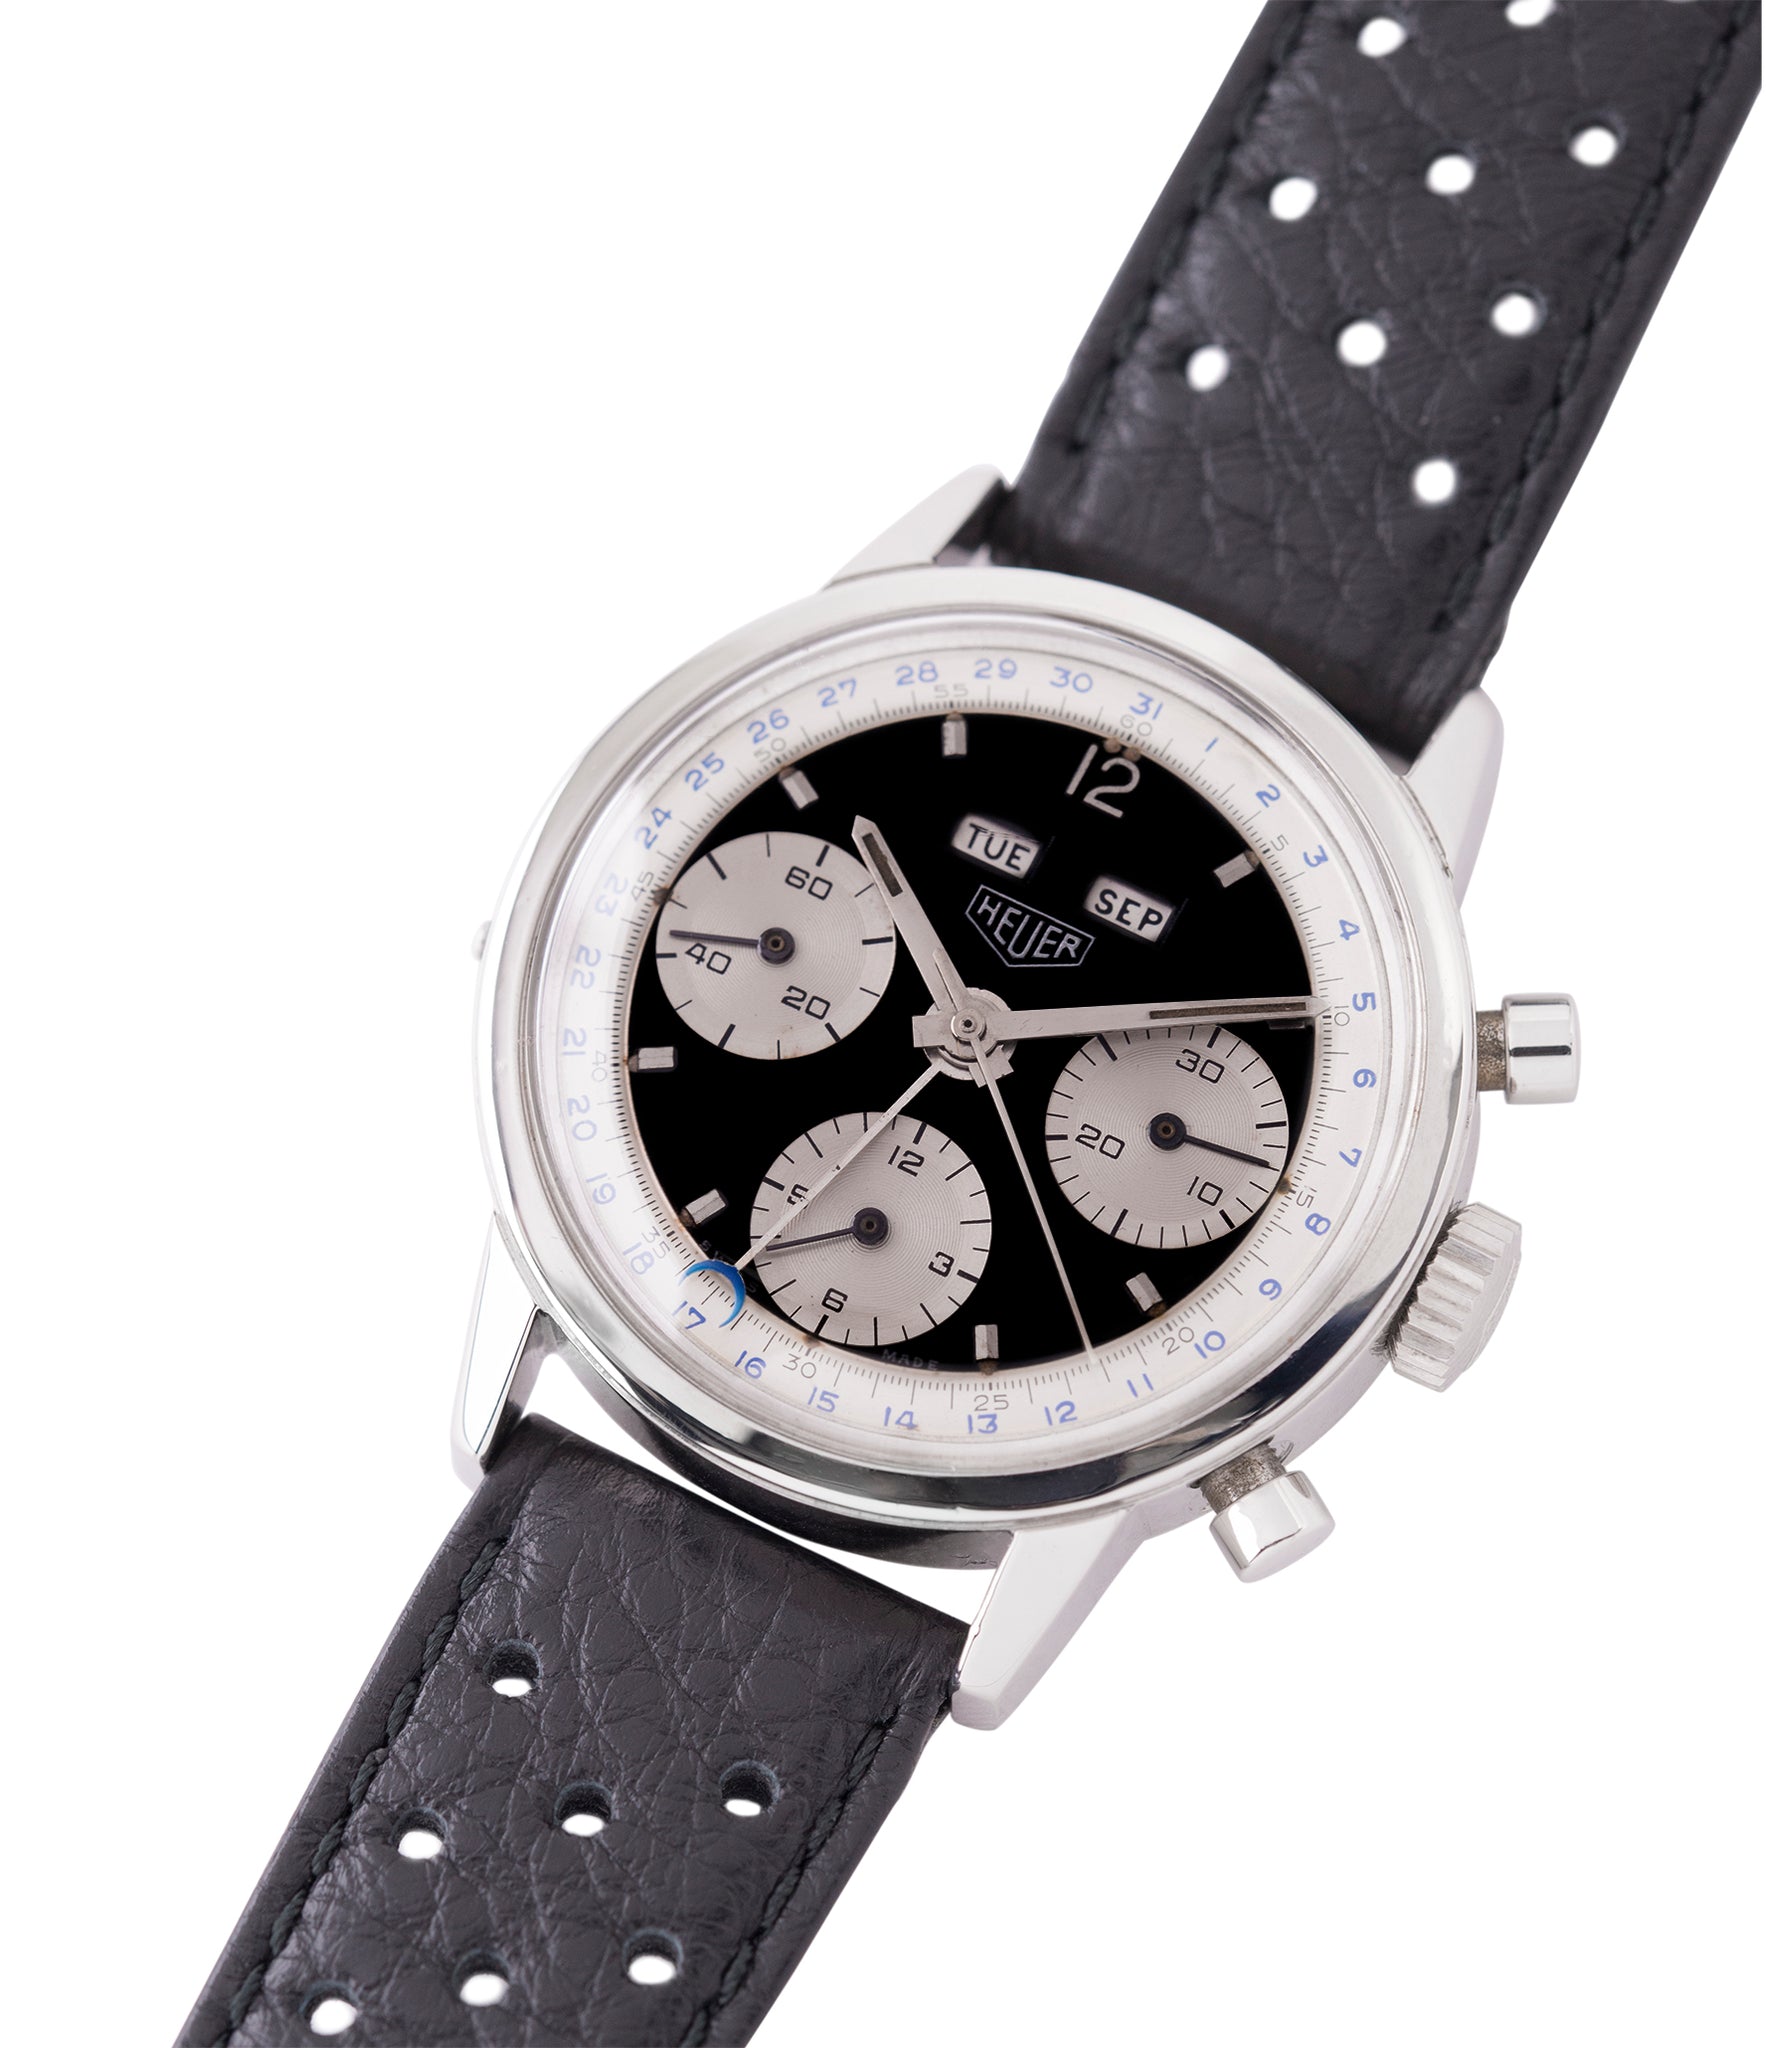 vintage Heuer Carrera 2546NS Dato 12 panda dial triple calendar chronograph most complicated Heuer watch for sale online at A Collected Man London UK specialist of rare watches